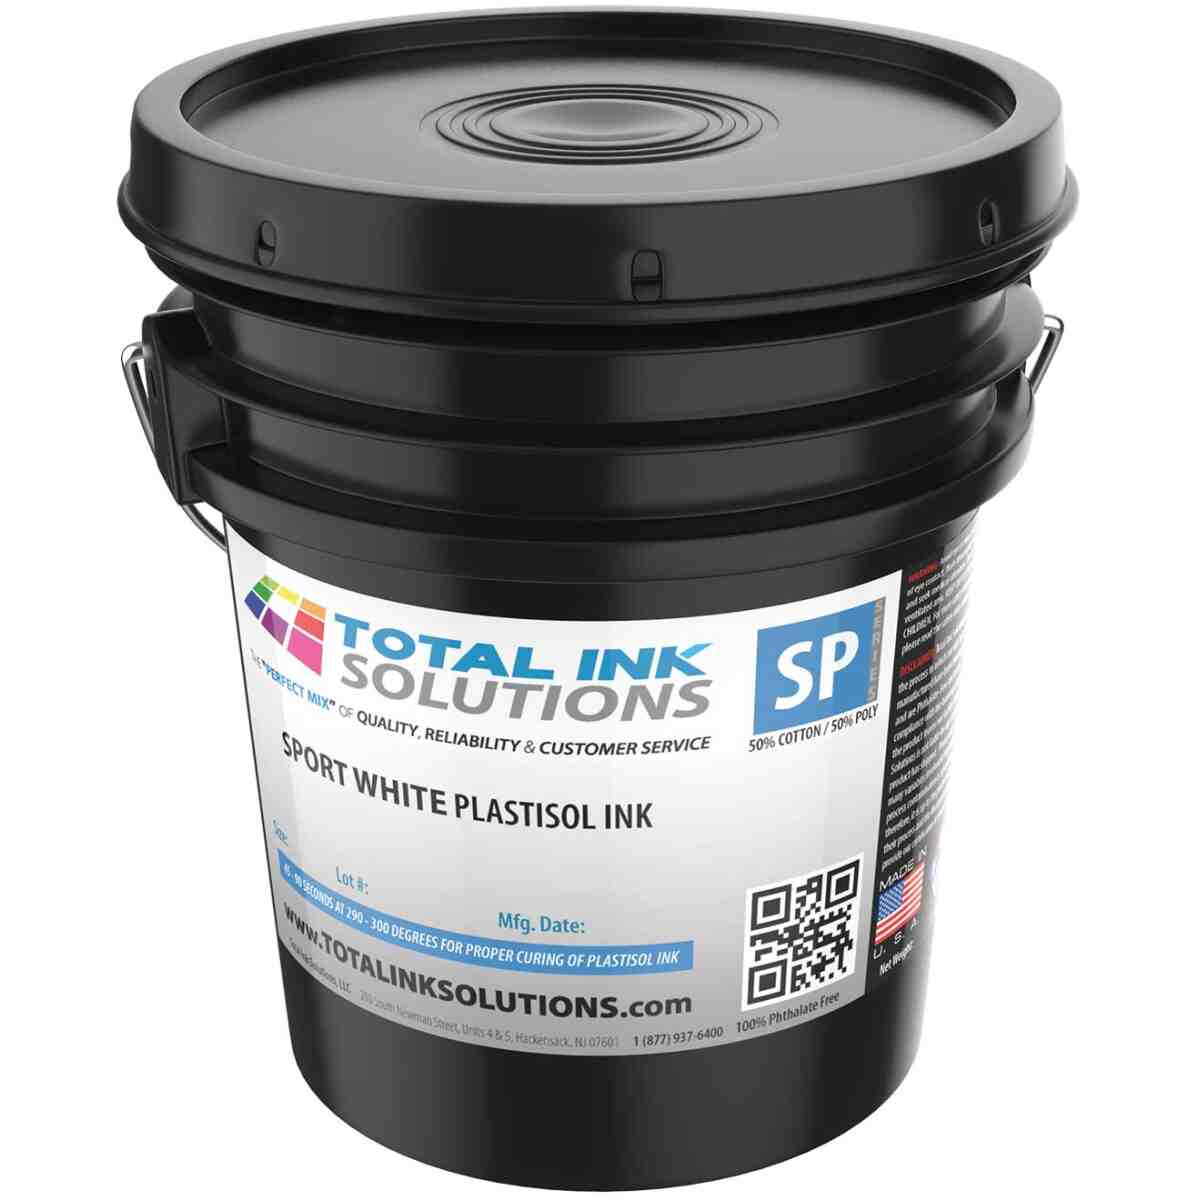 Sport White Plastisol Ink - 5 Gallon TOTAL INK SOLUTIONS®